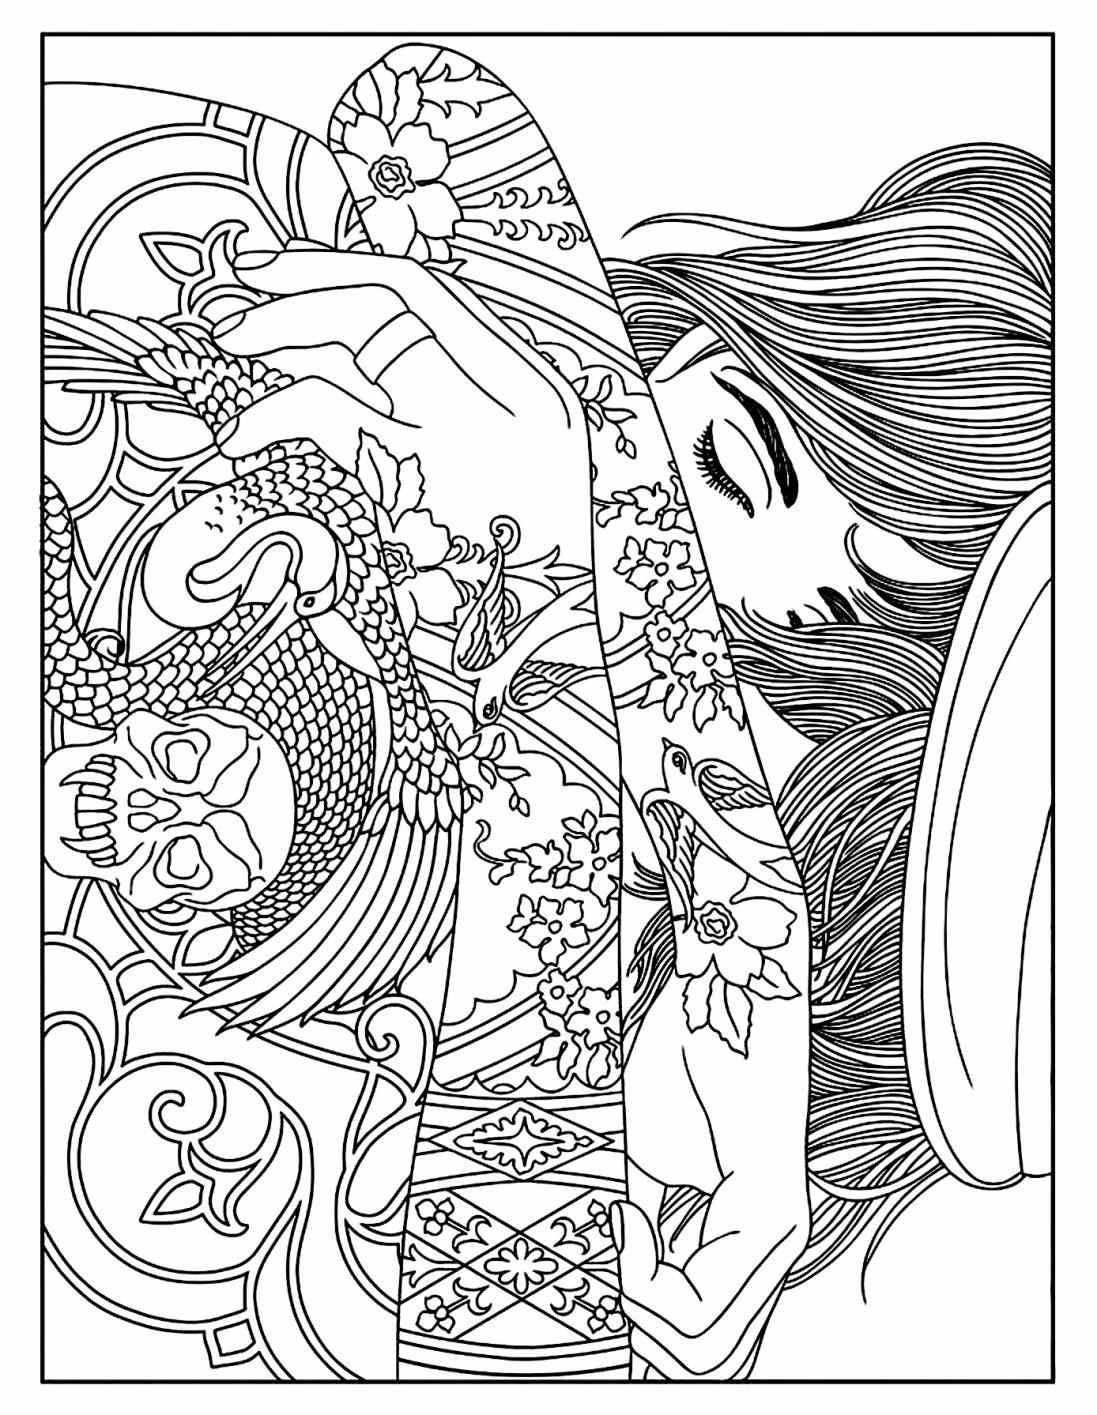 Detailed Landscape Coloring Pages For Adults 5